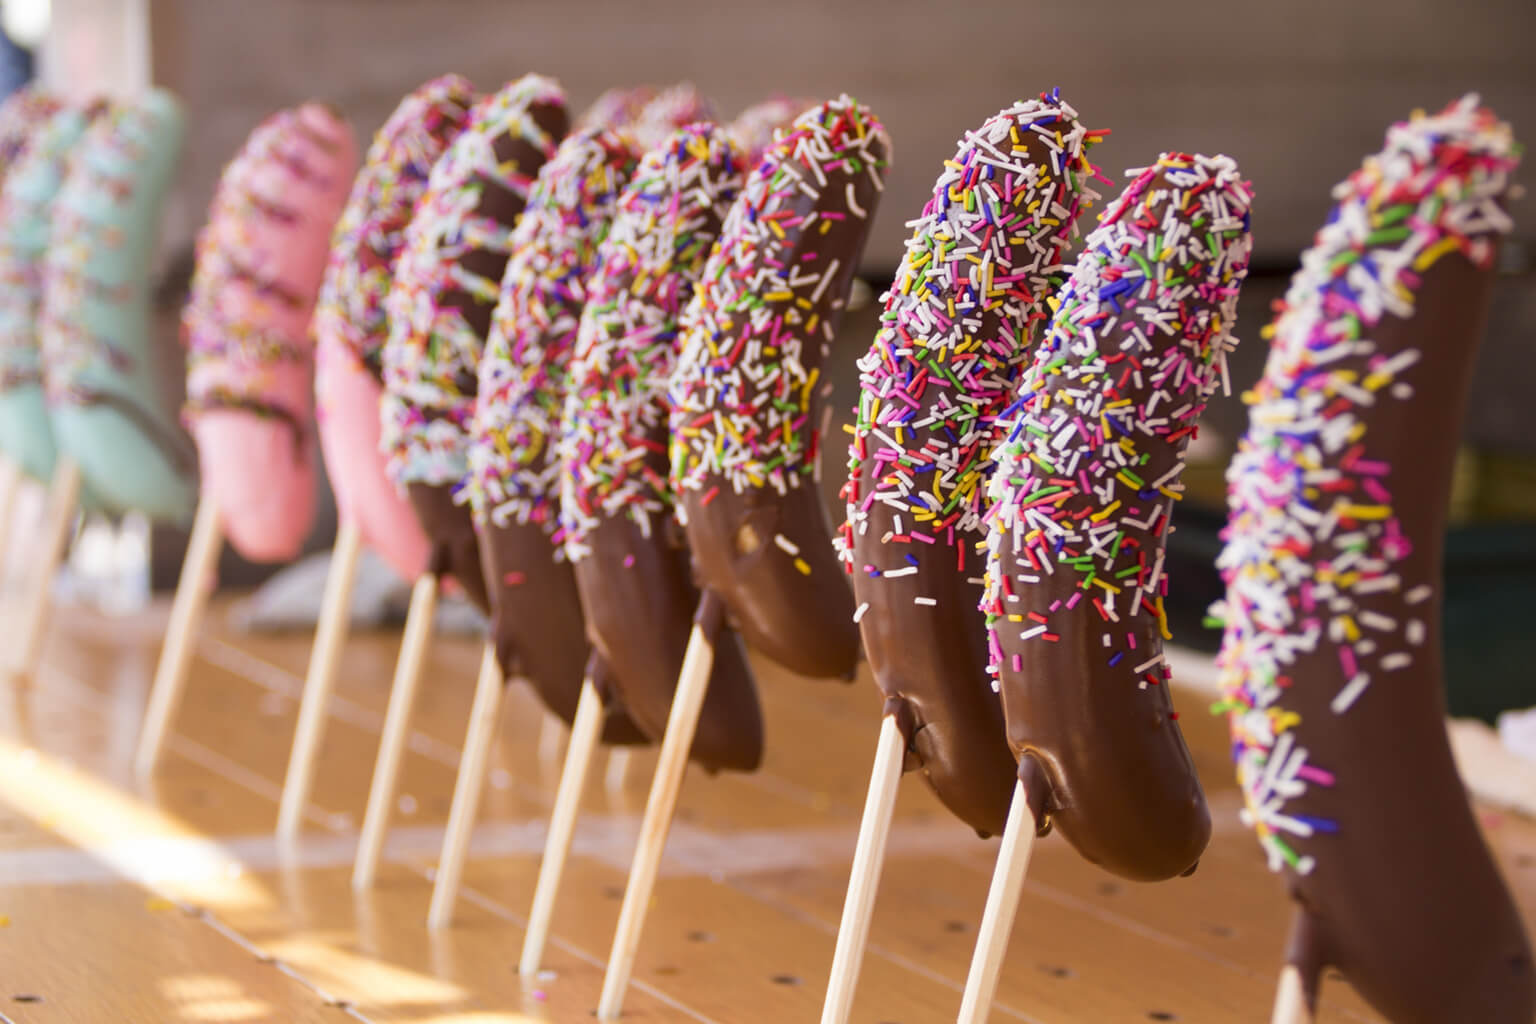 It is a chocolate-coated banana on a stick